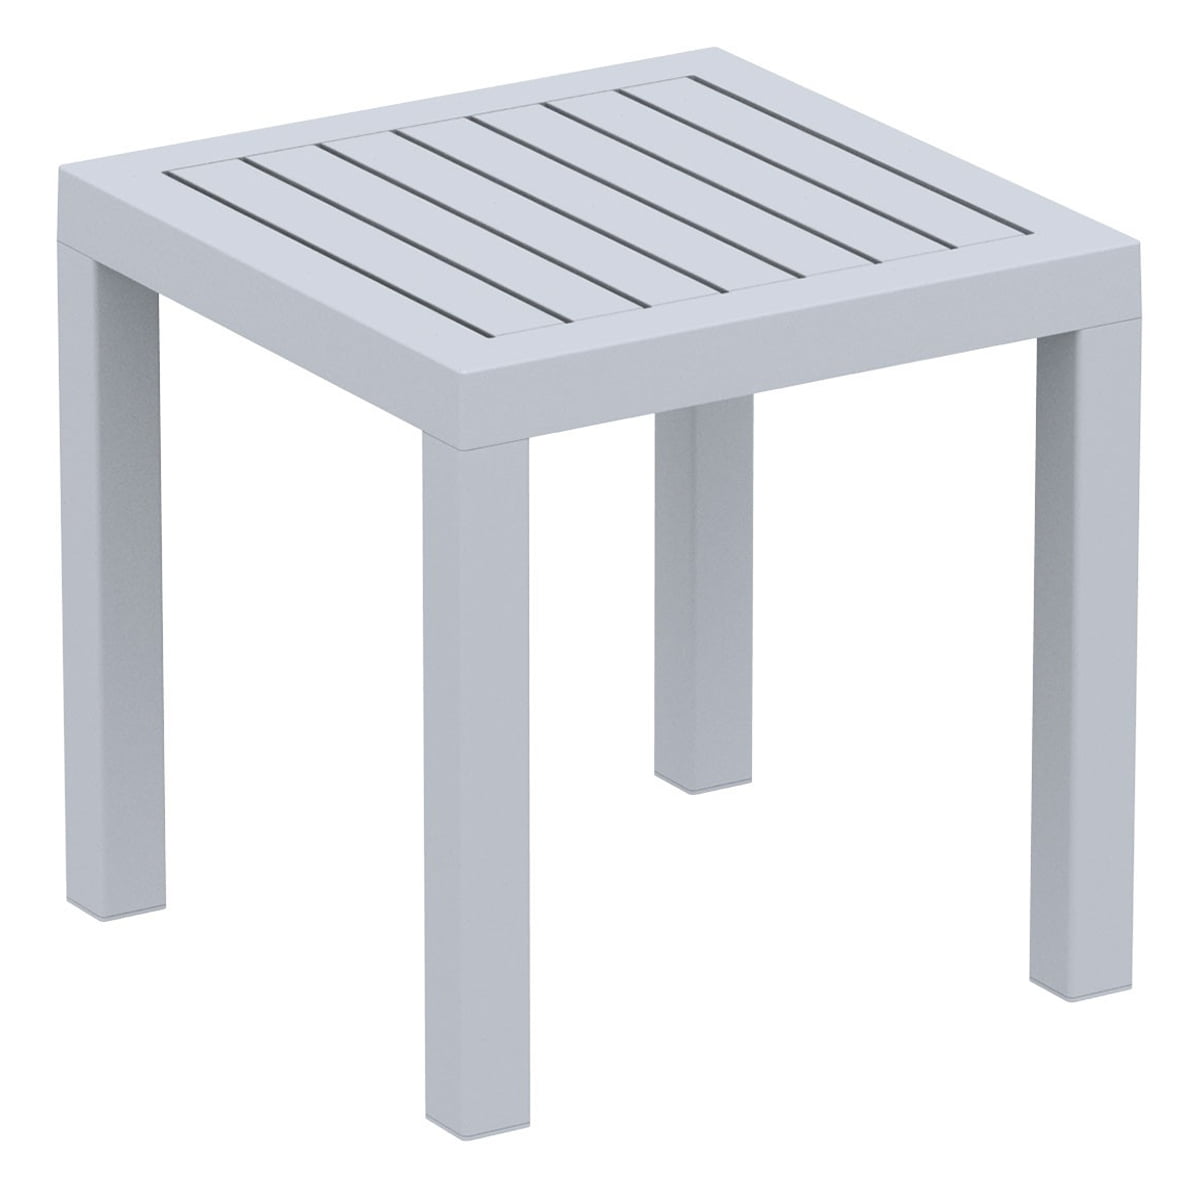 Neo 200066e Plastic Garden Side Table, Outdoor Plastic Side Tables